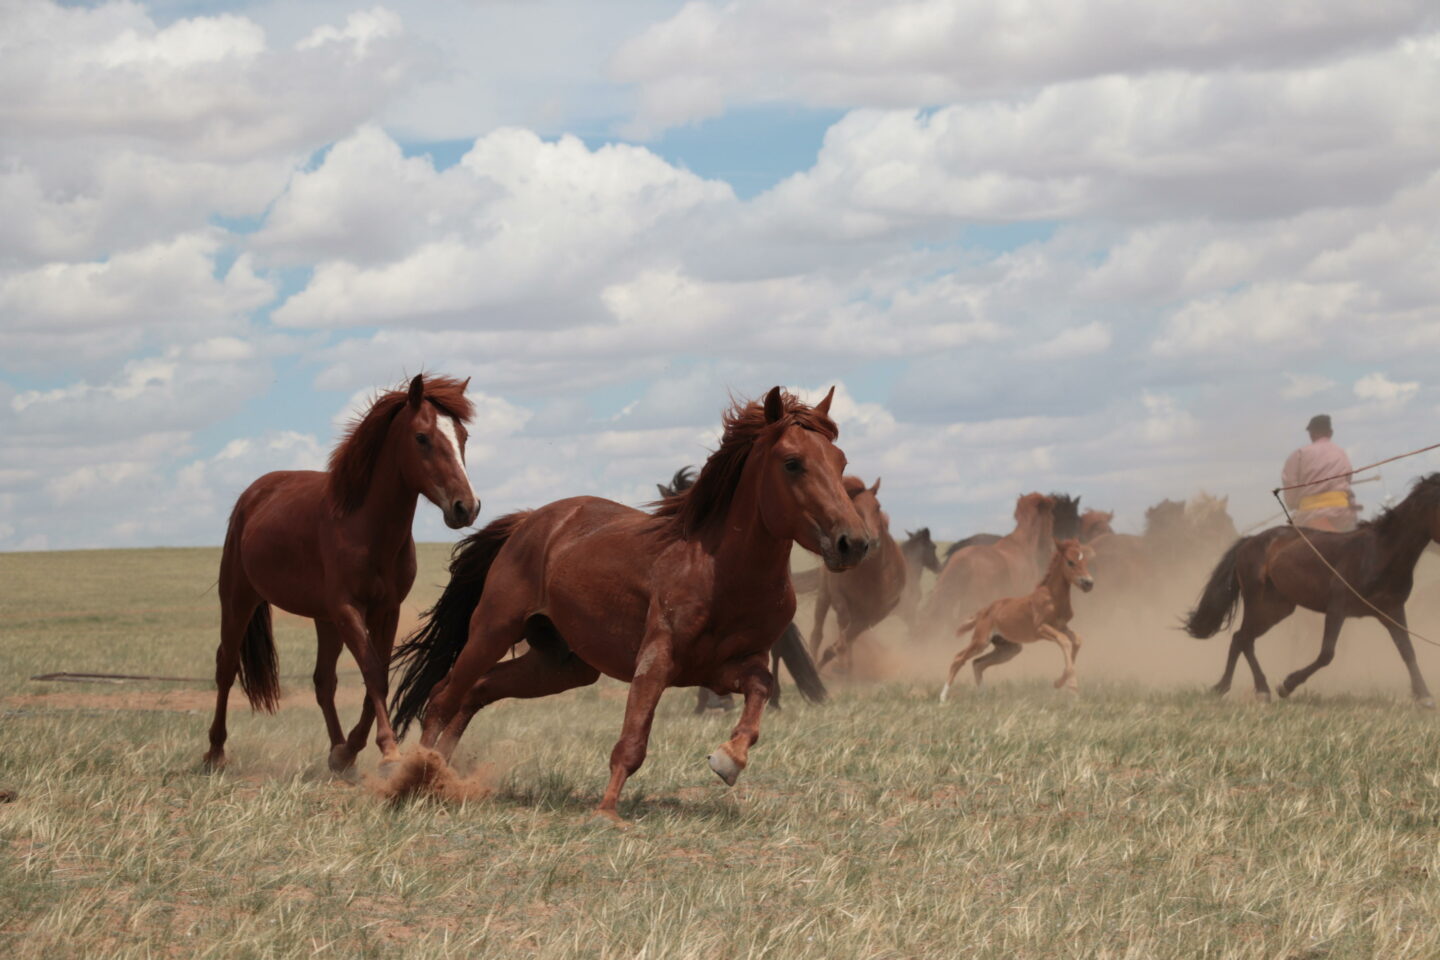 Horses on the steppe